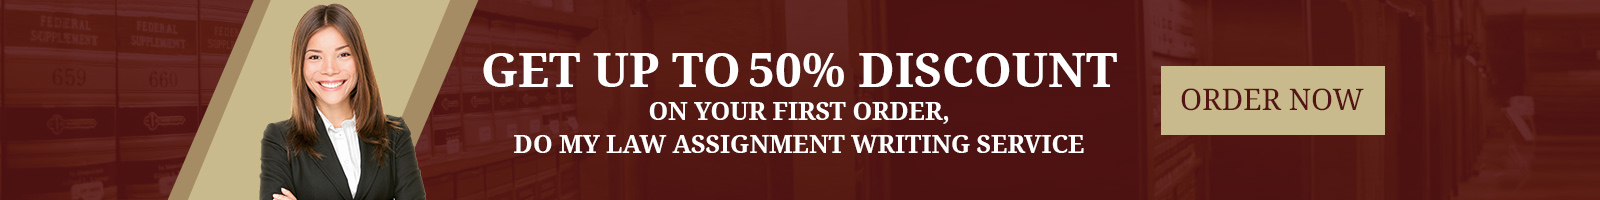 Do My Law Assignment Writing Service